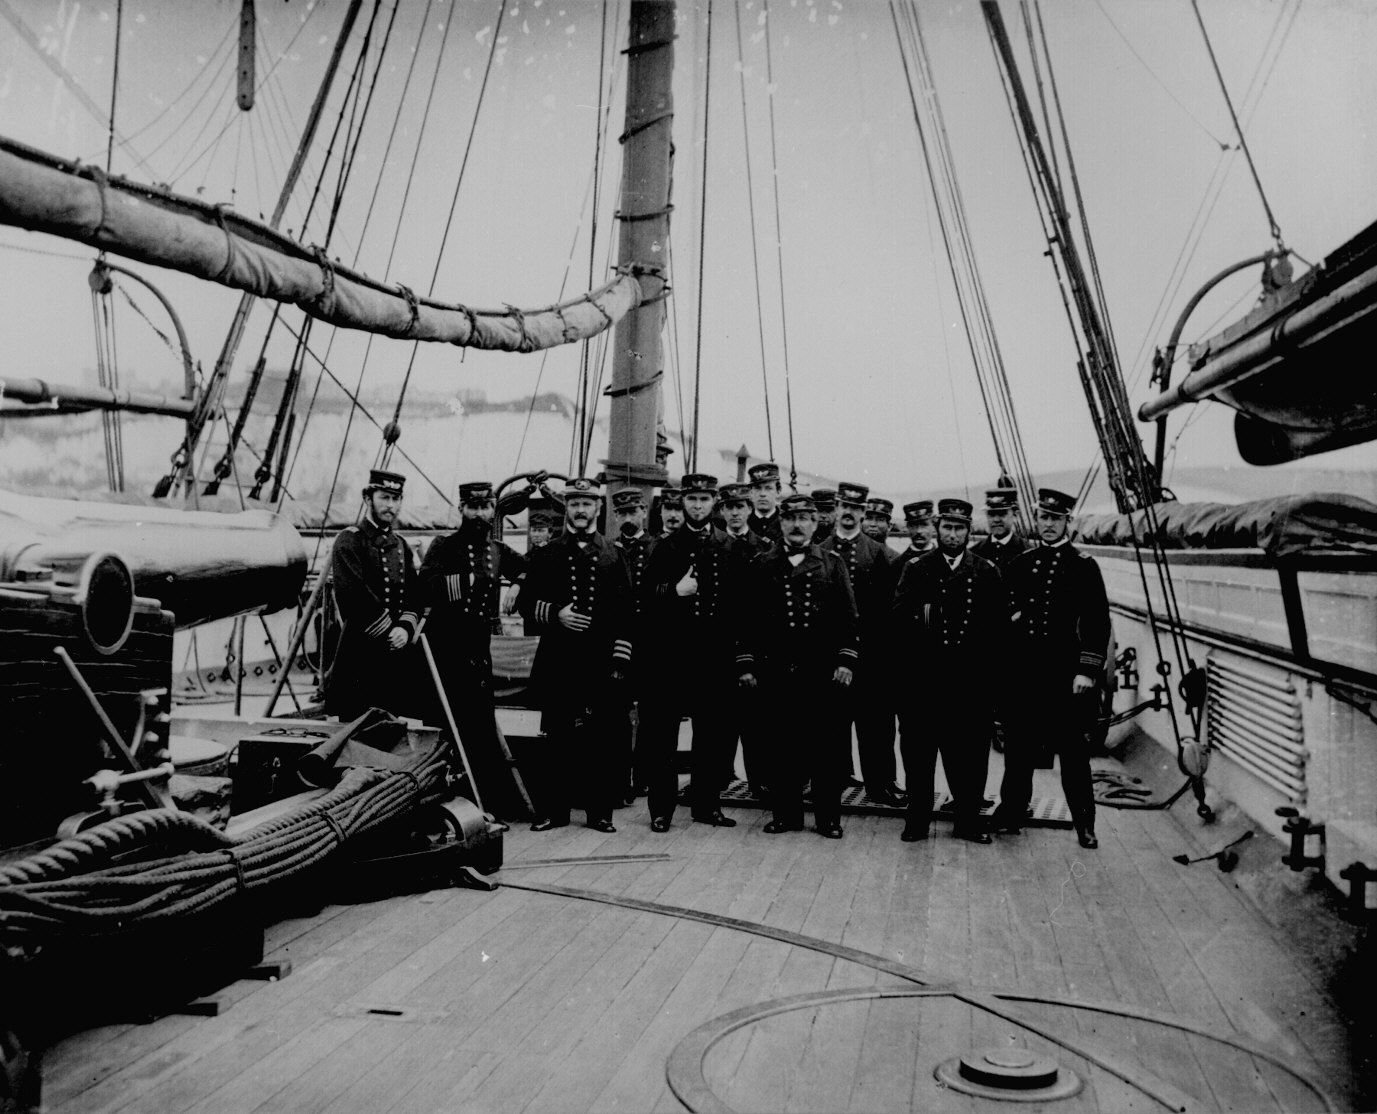 civil-war-054.jpgCapt. John A. Winslow (3d from left) and officers on board the U.S.S. Kearsarge after sinking the C.S.S. Alabama, 1864.jpg